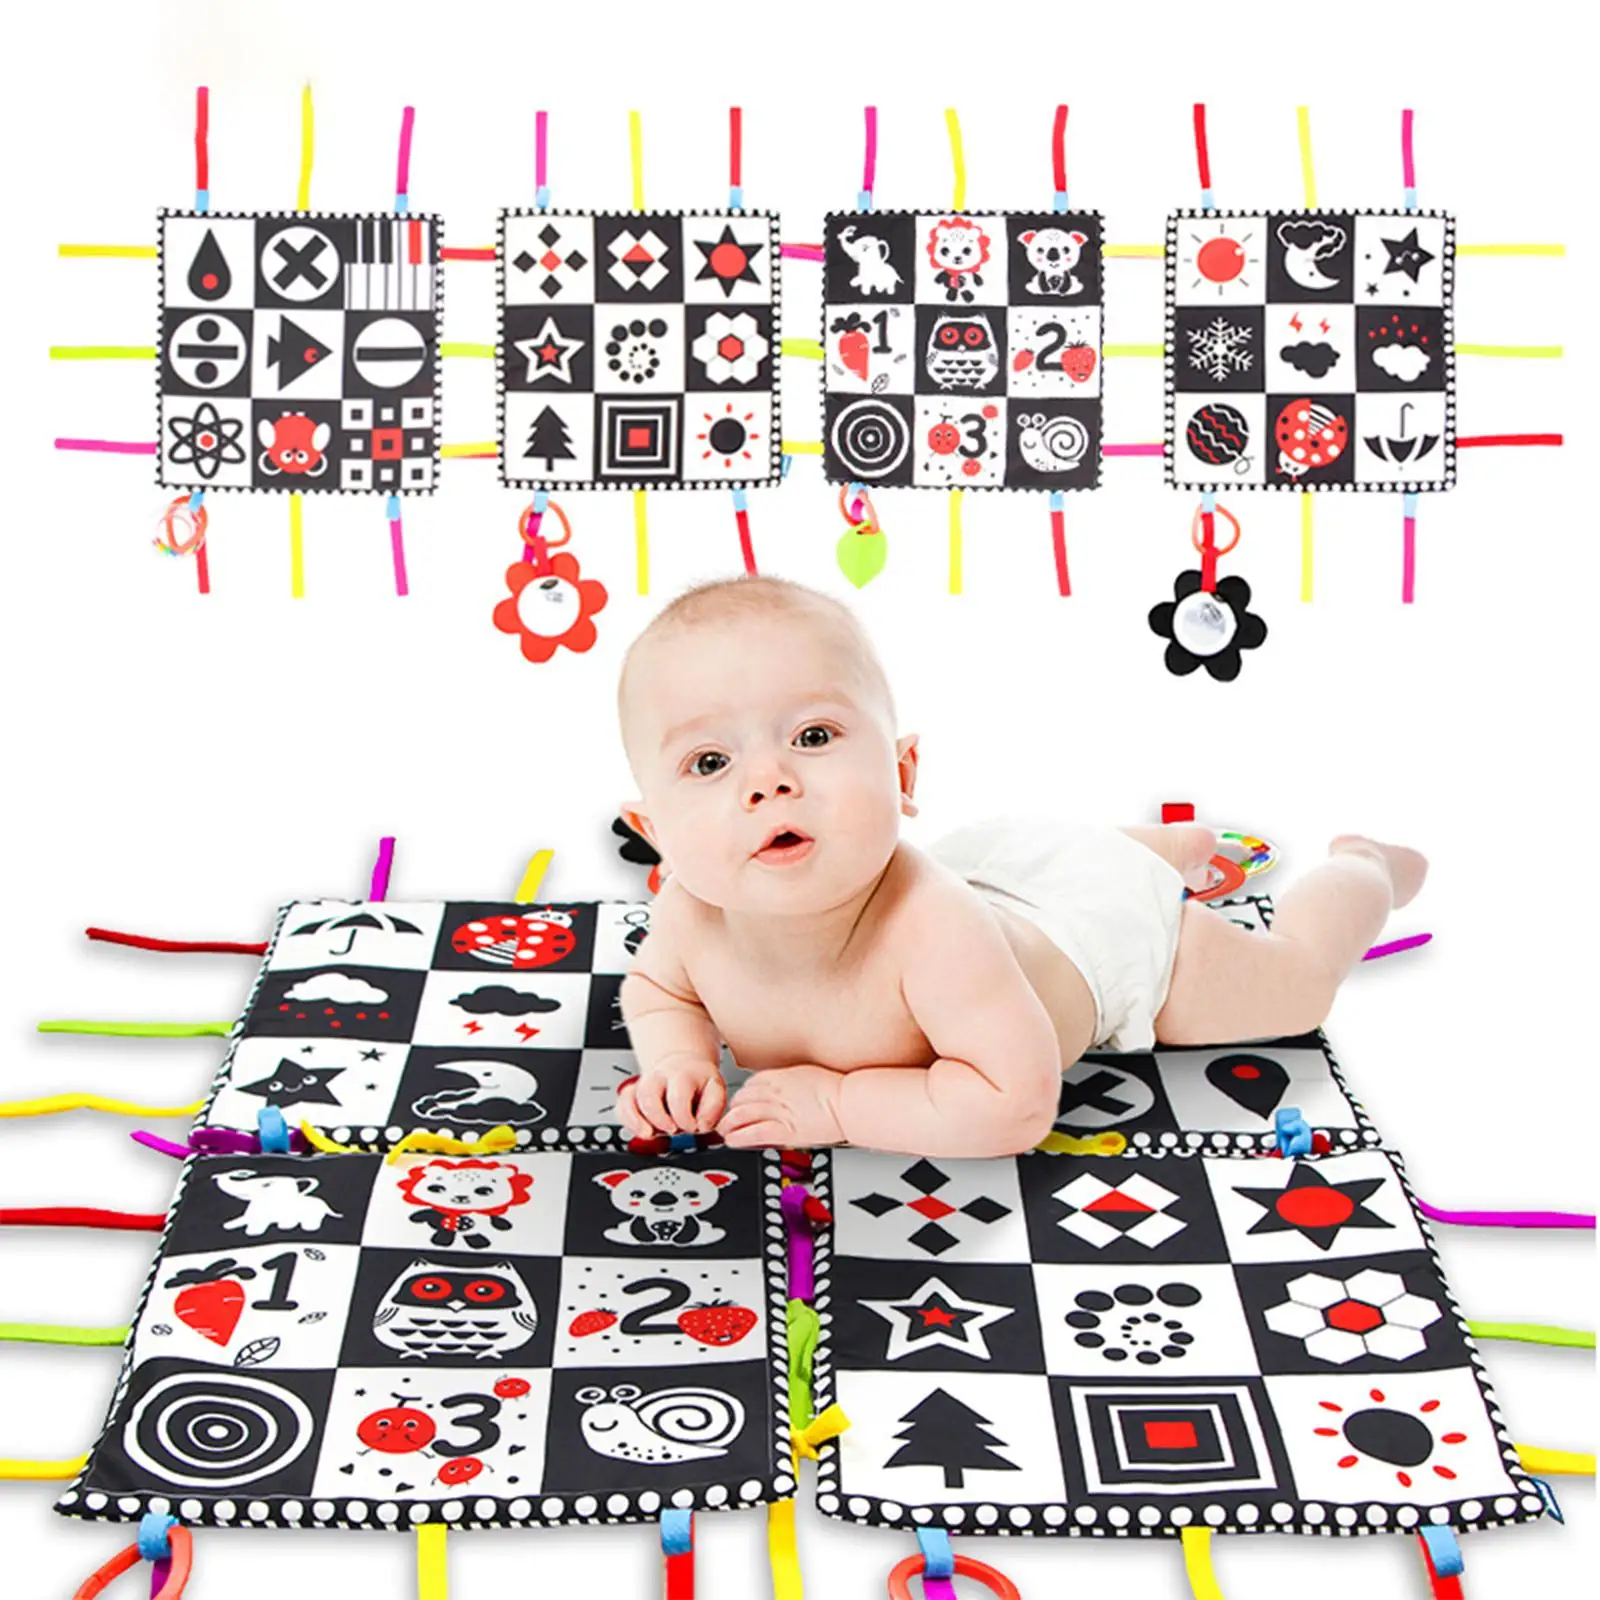 Multifunctional Baby Play Mat Development Playmat for Infants 0-6 Months